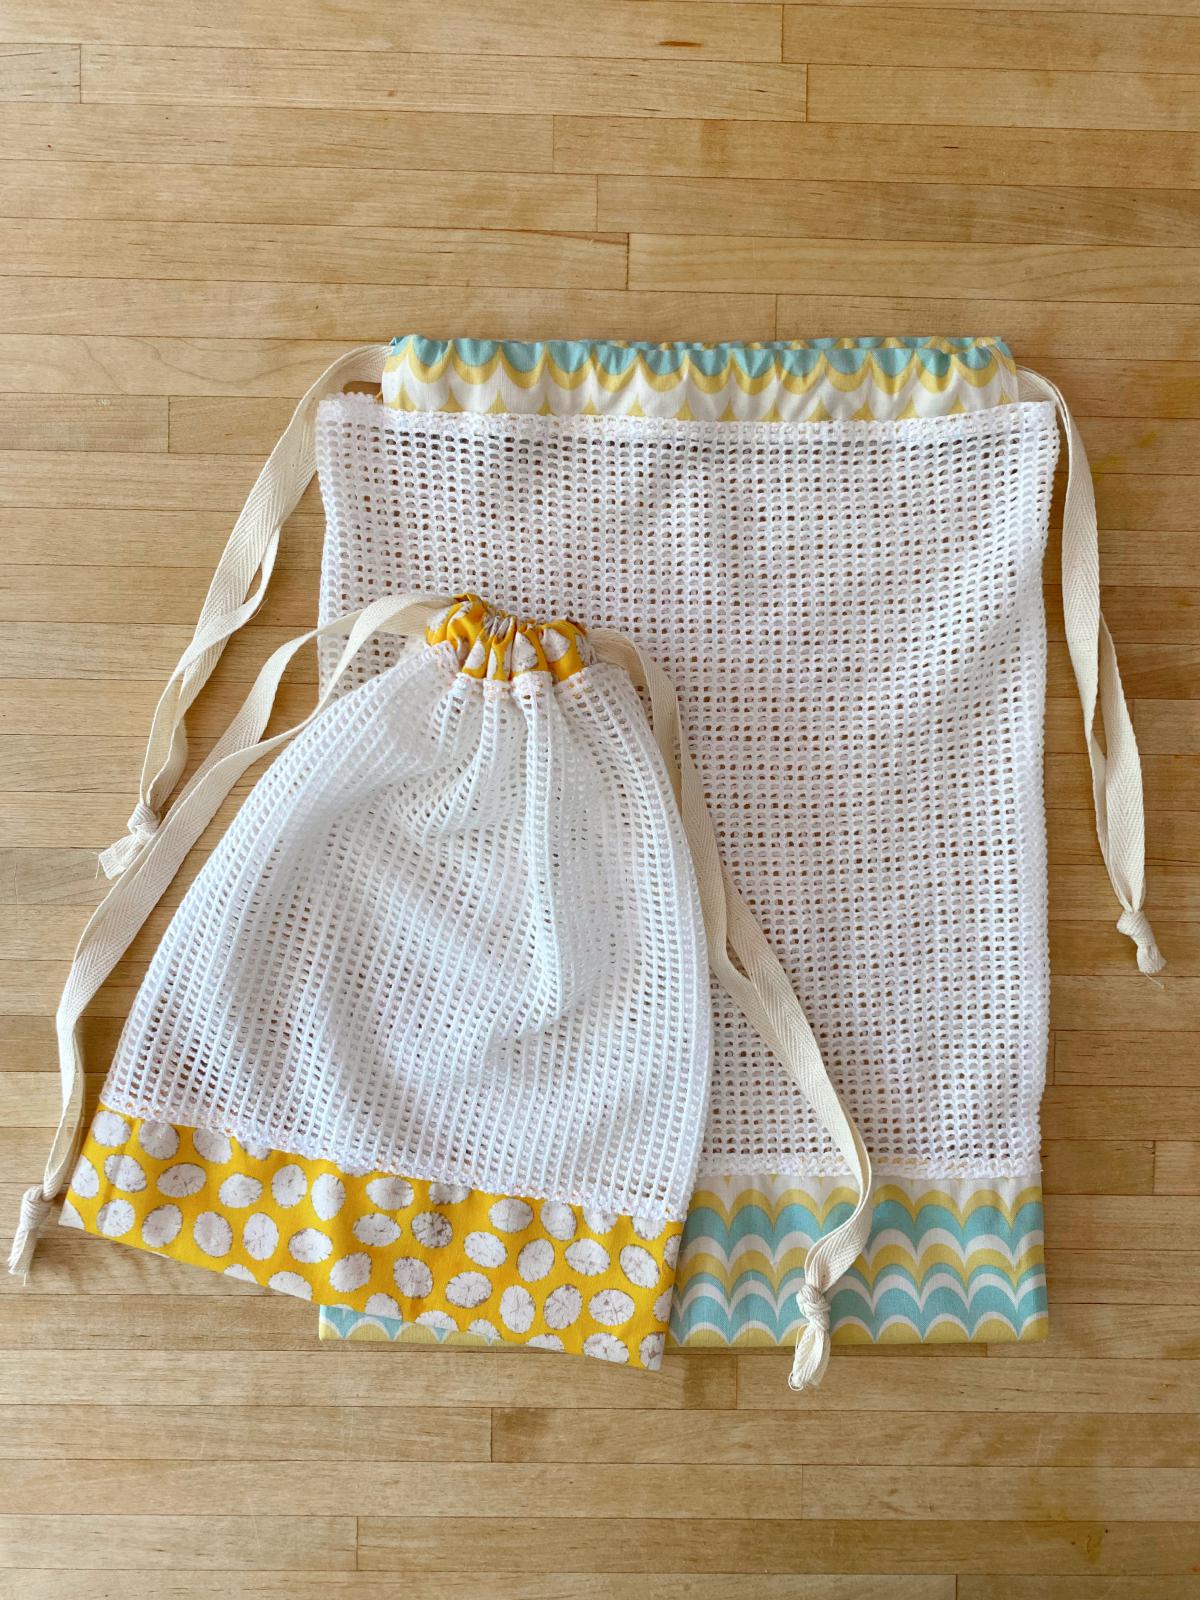 How to Make Reusable Produce Bags - WeAllSew